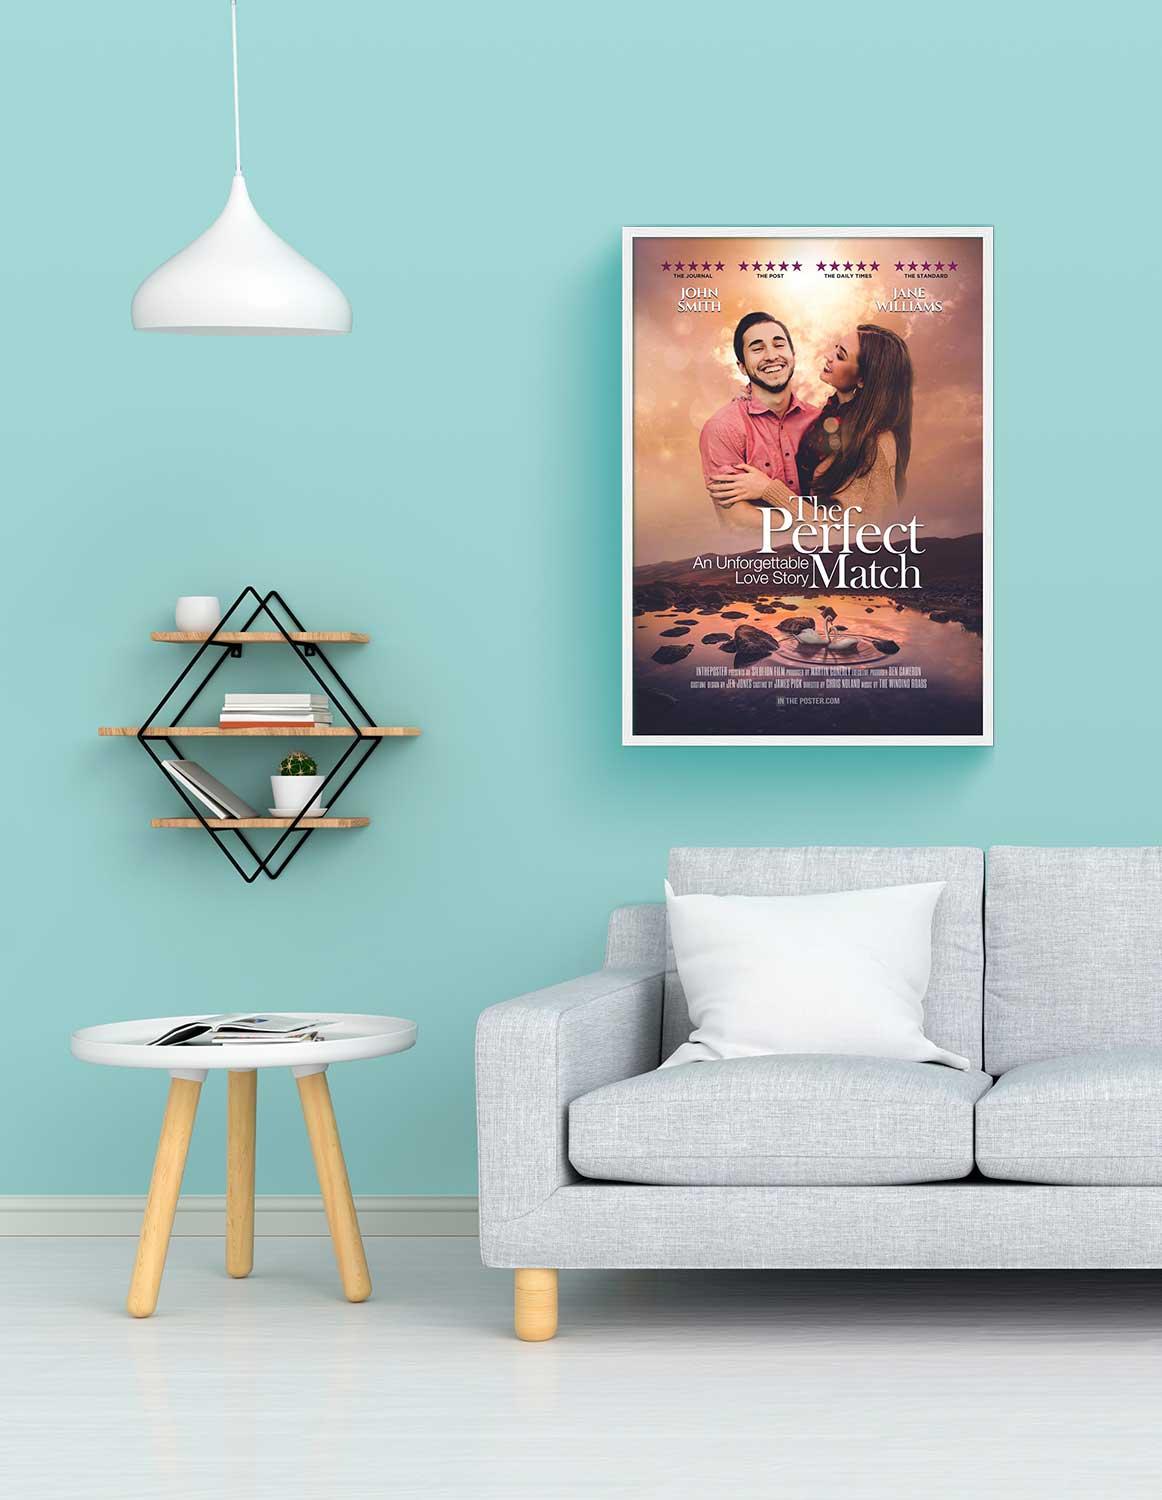 The perfect match romantic movie poster in a regular white frame on a blue wall above a grey modern sofa